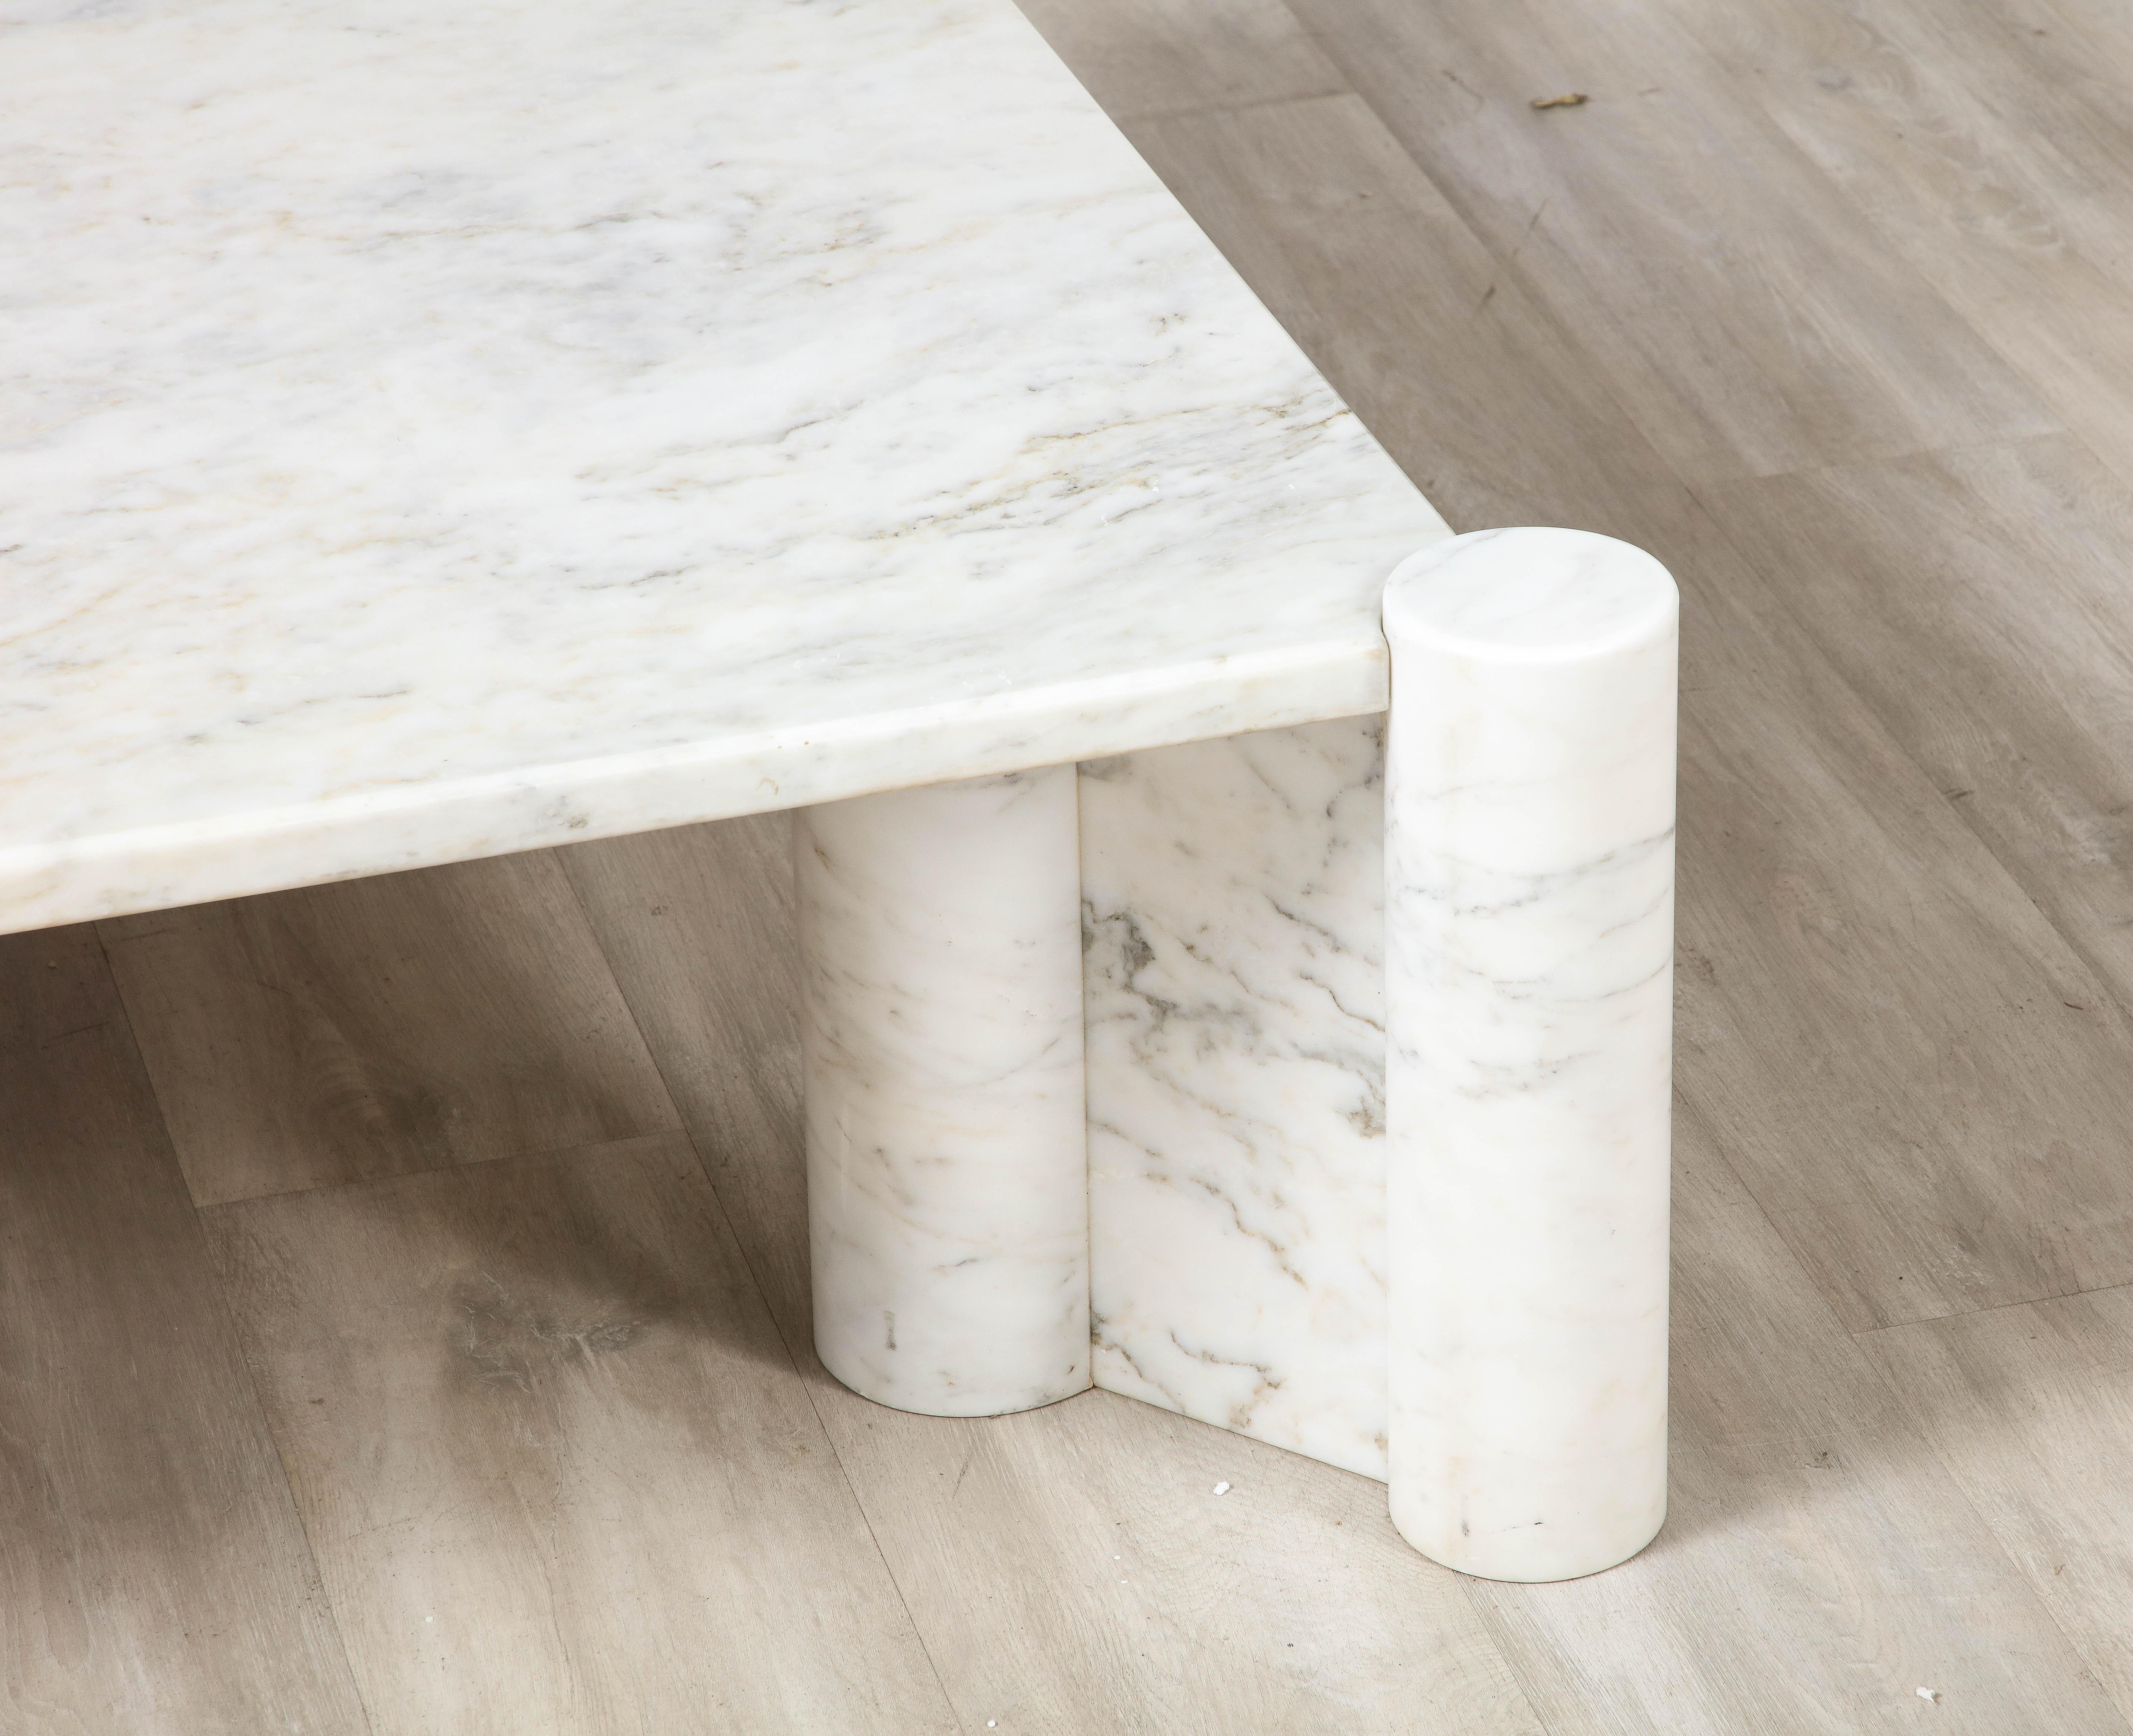 Gae Aulenti for Knoll 'Jumbo' Carrara Marble Coffee Table, Italy, circa 1964 In Good Condition For Sale In New York, NY